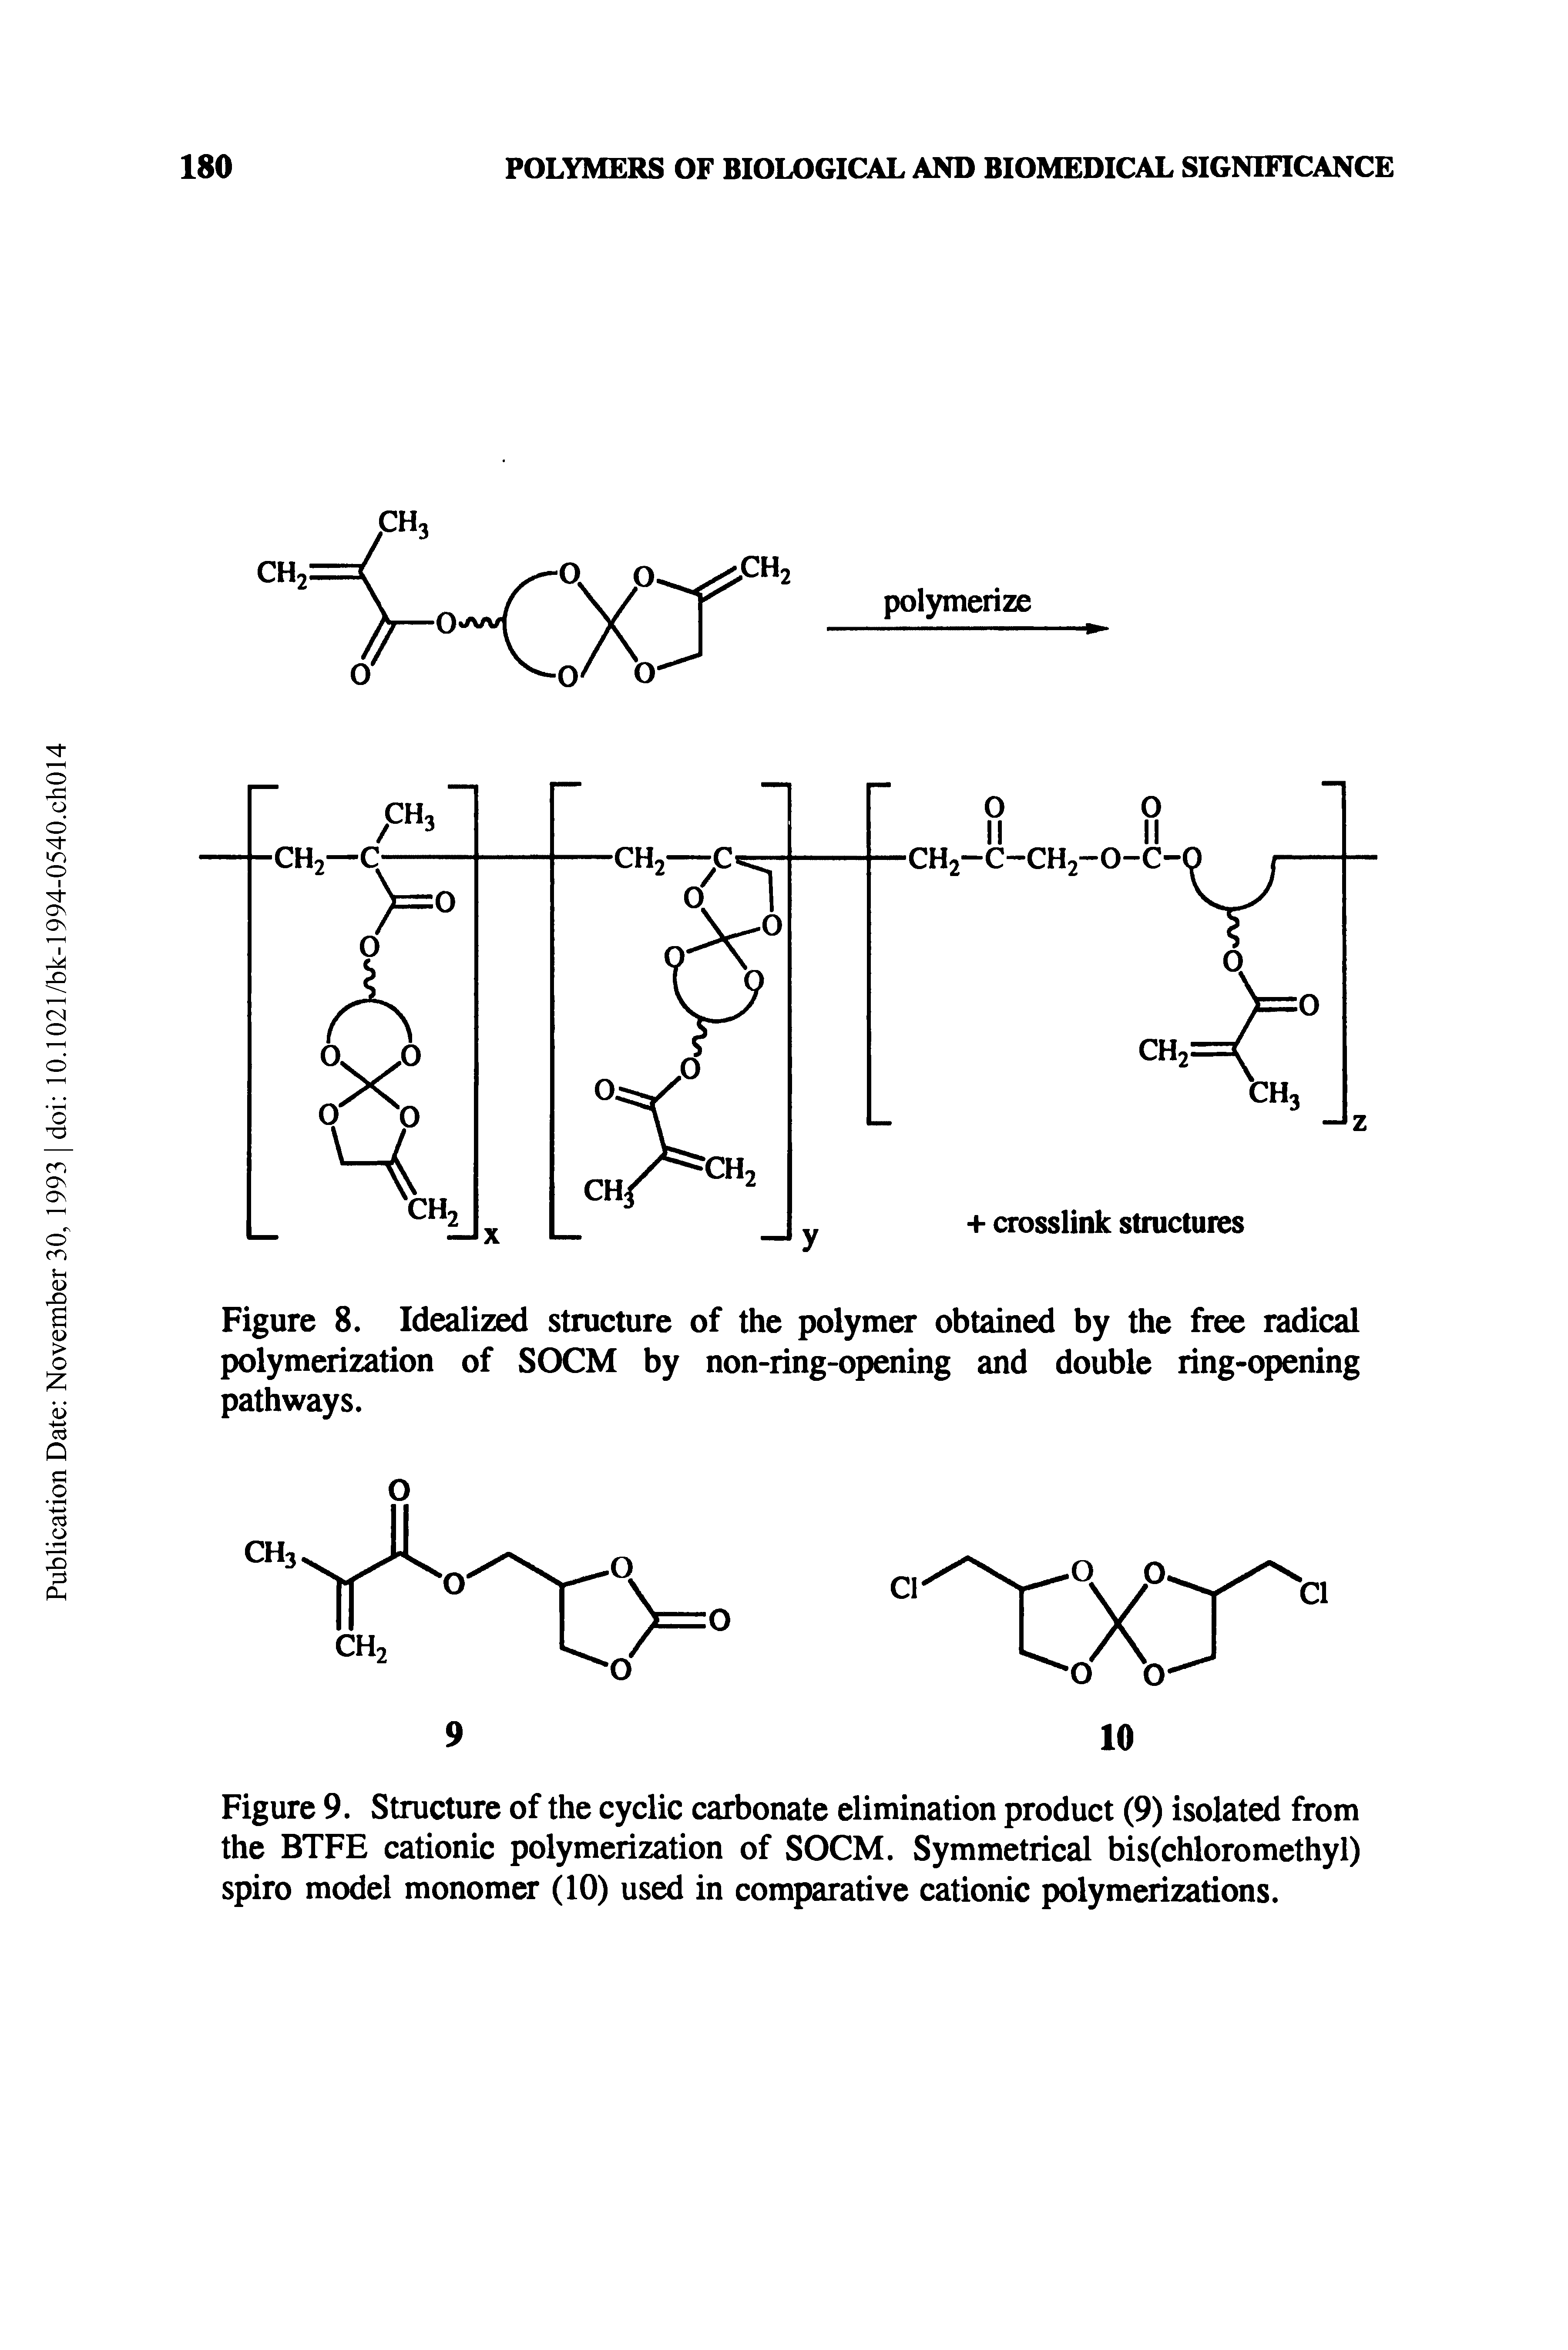 Figure 9. Structure of the cyclic carbonate elimination product (9) isolated from the BTFE cationic polymerization of SOCM. Symmetrical bis(chloromethyl) spiro model monomer (10) used in comparative cationic polymerizations.